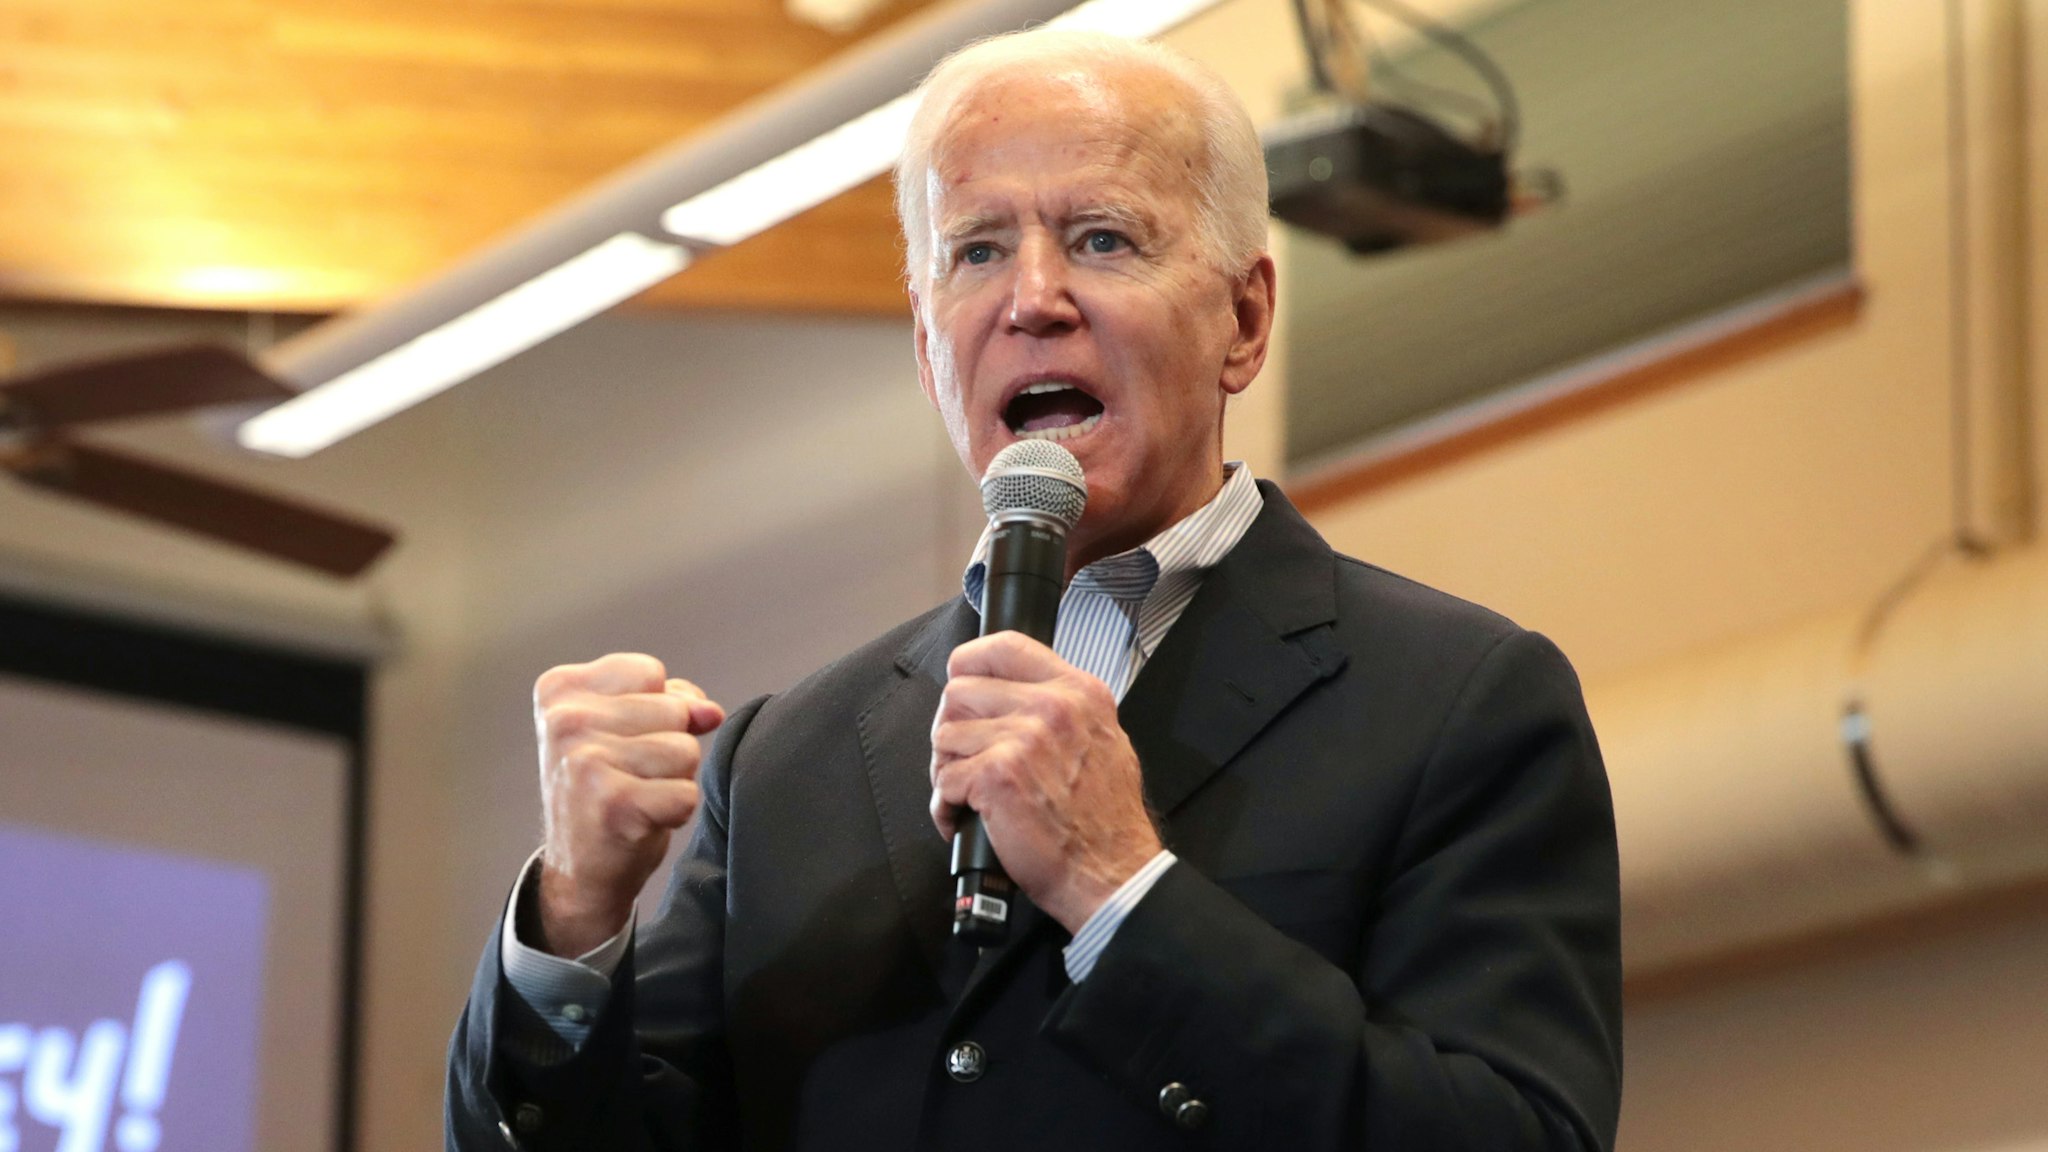 ALGONA, IOWA - DECEMBER 02: Democratic presidential candidate, former Vice President Joe Biden speaks during a campaign stop at the Water's Edge Nature Center on December 2, 2019 in Algona, Iowa. The stop was part of Biden's 650-mile "No Malarkey" campaign bus trip through rural Iowa. The 2020 Iowa Democratic caucuses will take place on February 3, 2020, making it the first nominating contest for the Democratic Party in choosing their presidential candidate to face Donald Trump in the 2020 election.